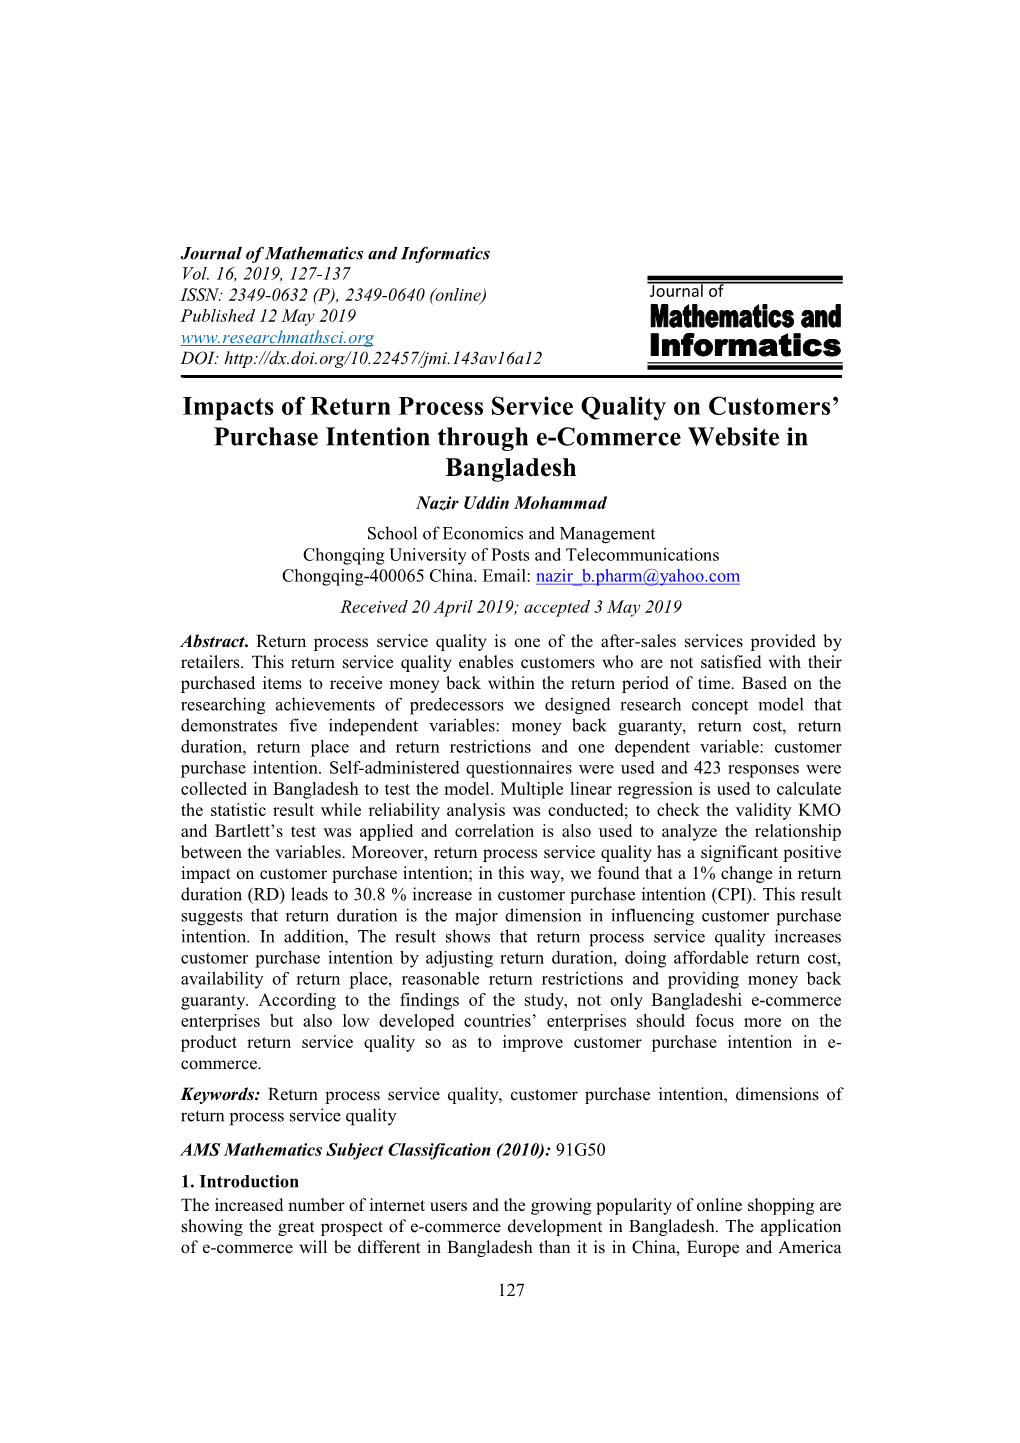 Impacts of Return Process Service Quality on Customers' Purchase